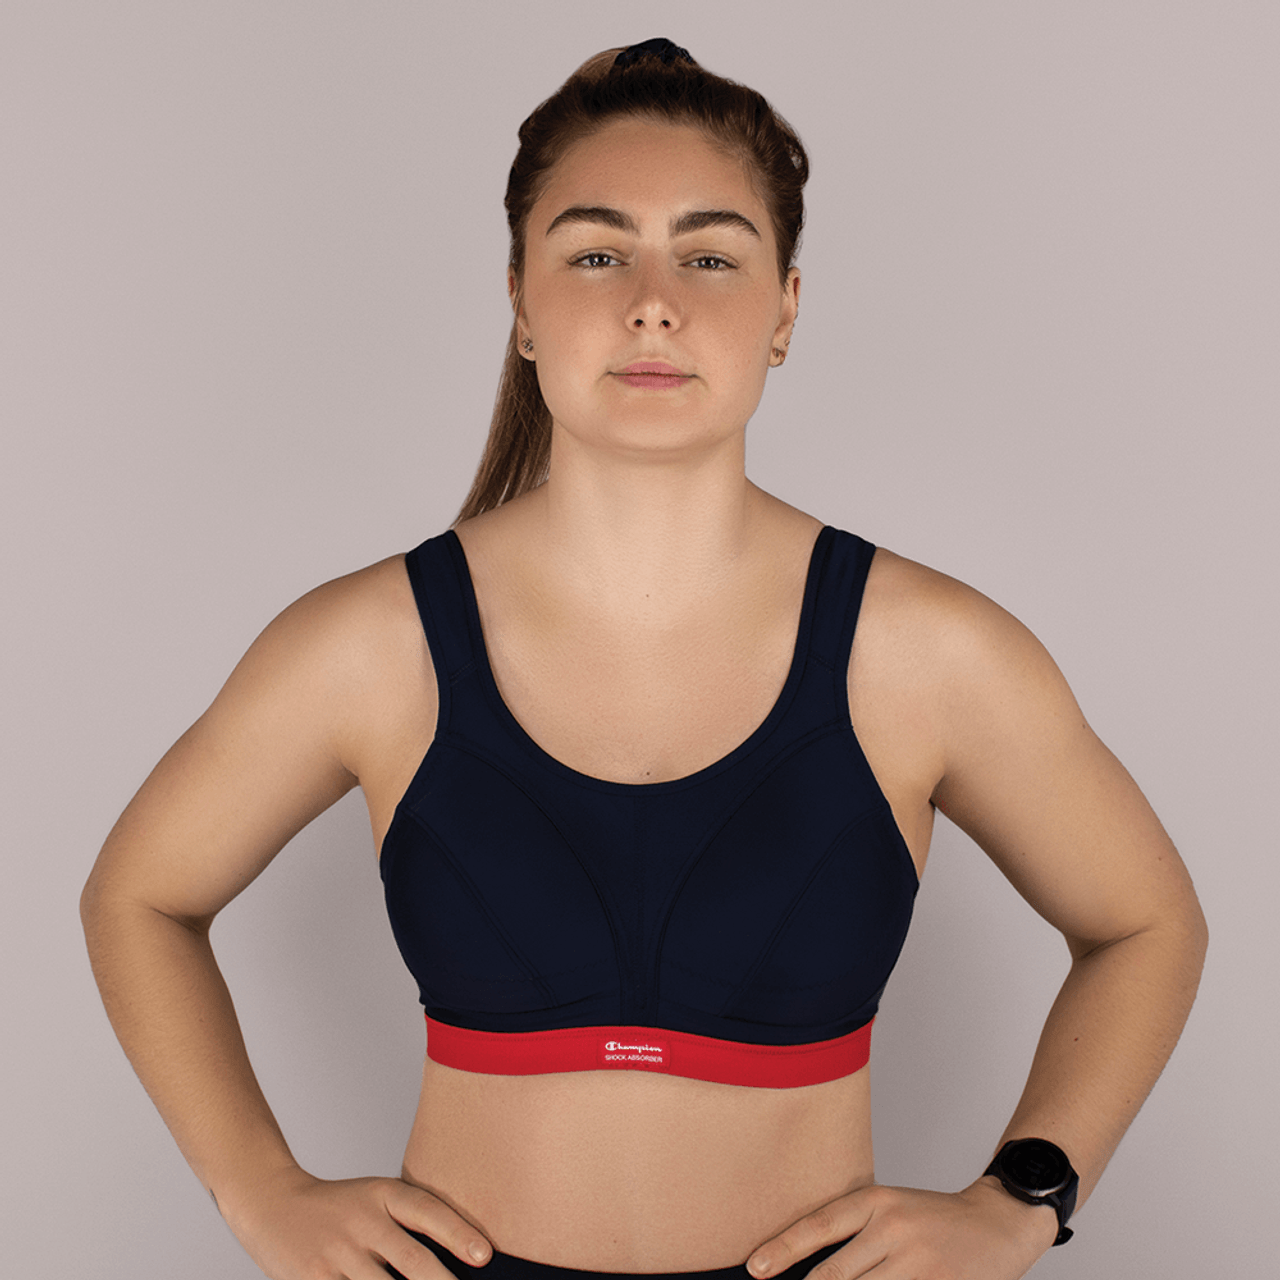 D+ Max Sports Bra by Shock Absorber, White, Non Wired Sports Bra